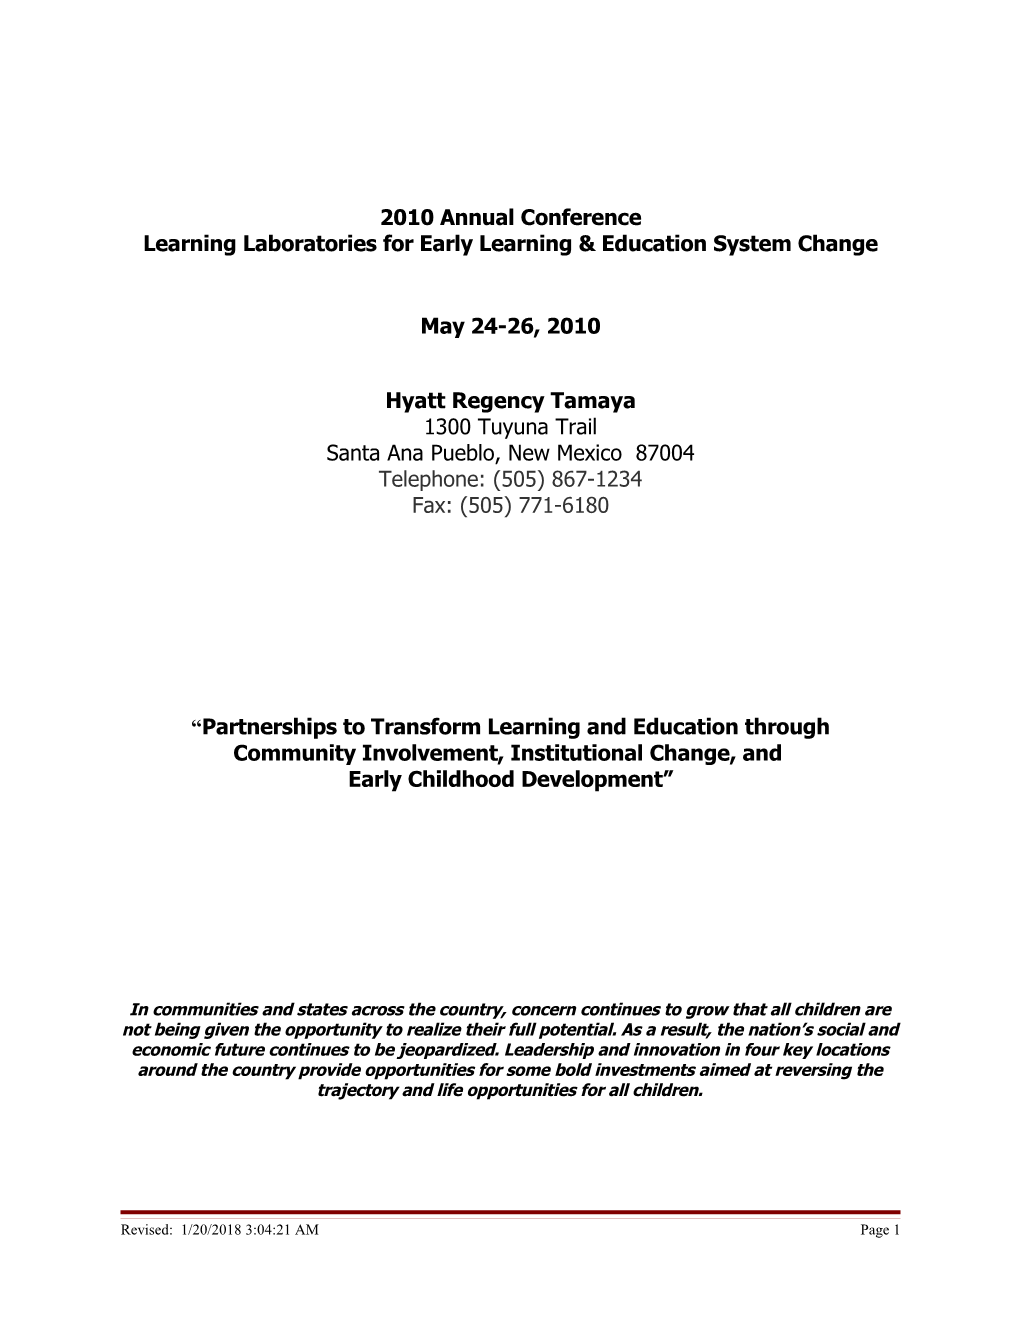 Learning Laboratories for Early Learning & Education System Change